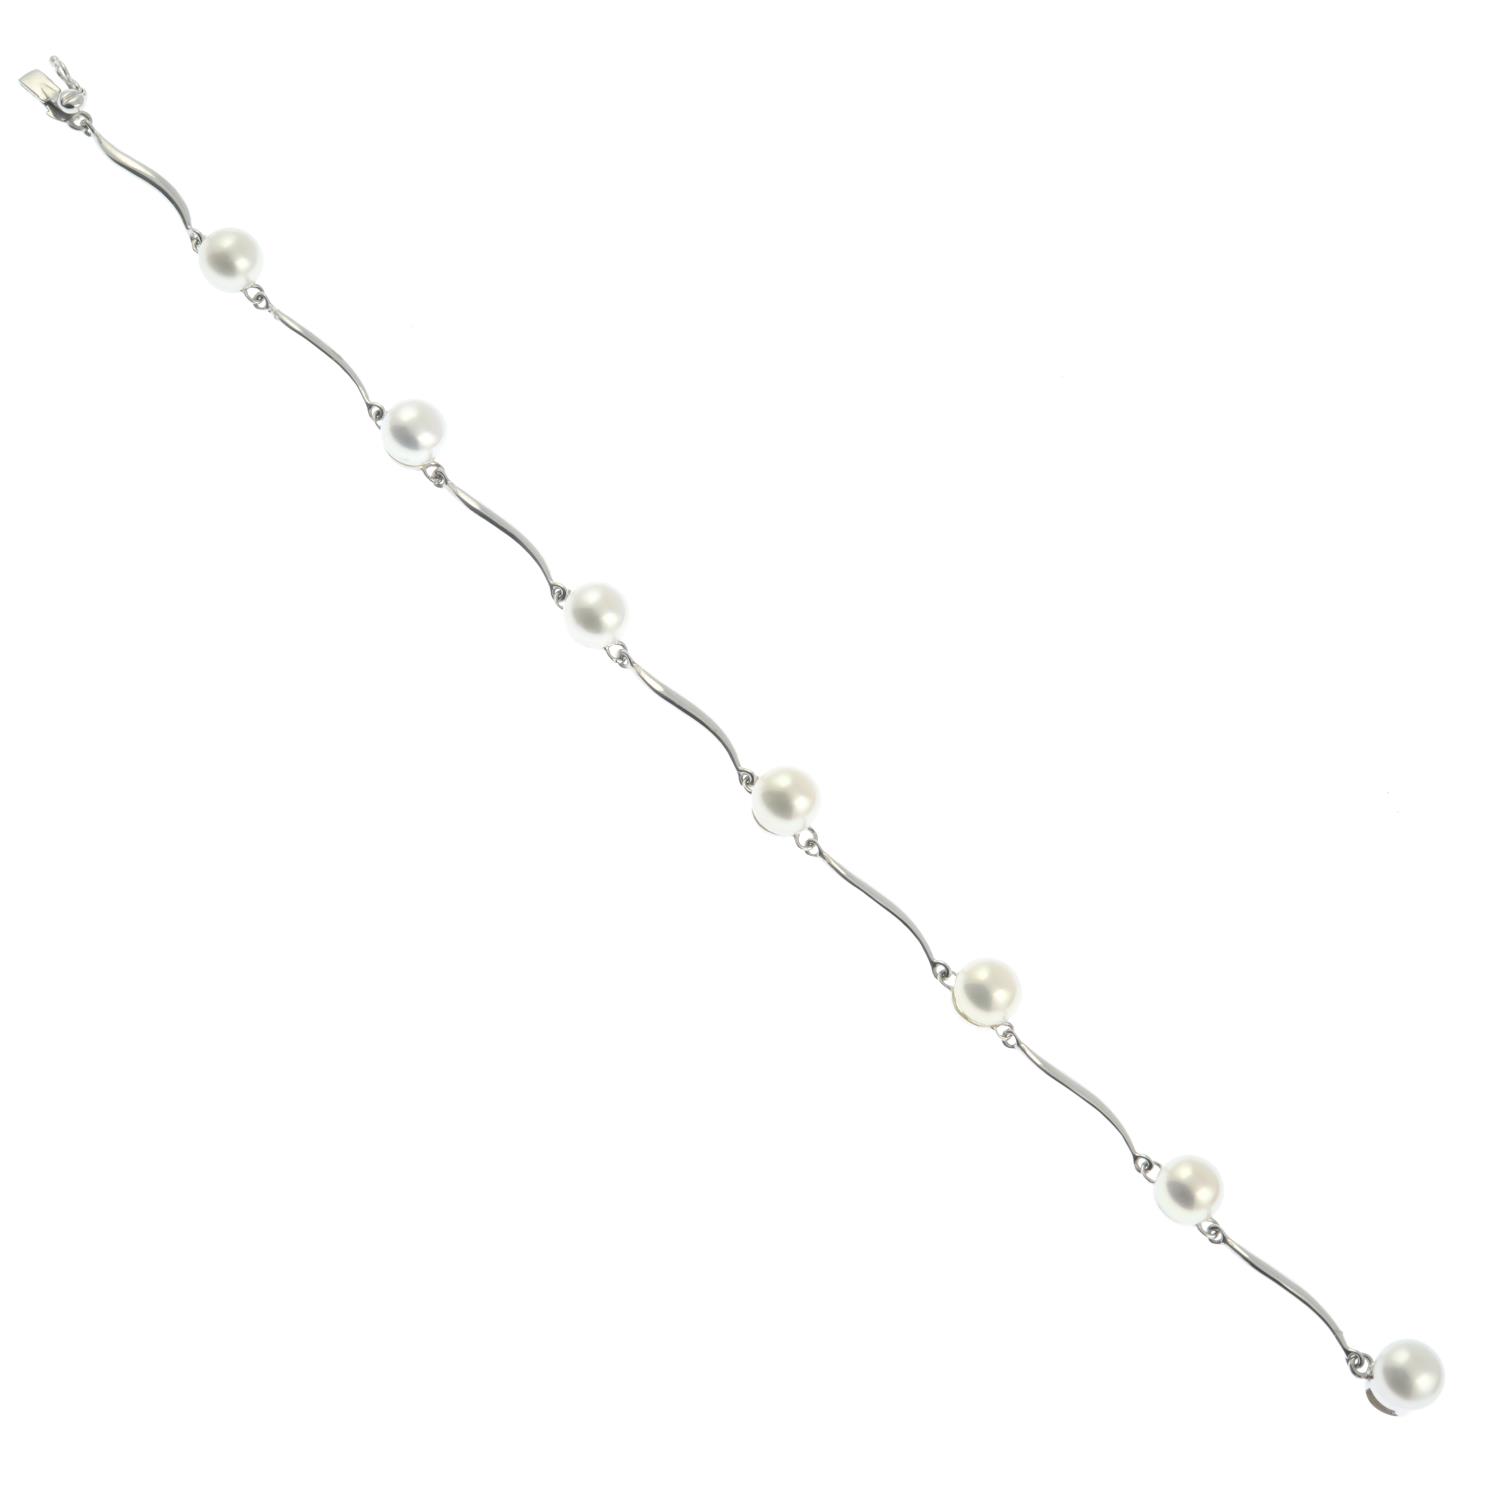 A 9ct gold cultured pearl bracelet.Hallmarks for London.Diameter of one cultured pearl 7.5mms. - Image 2 of 3